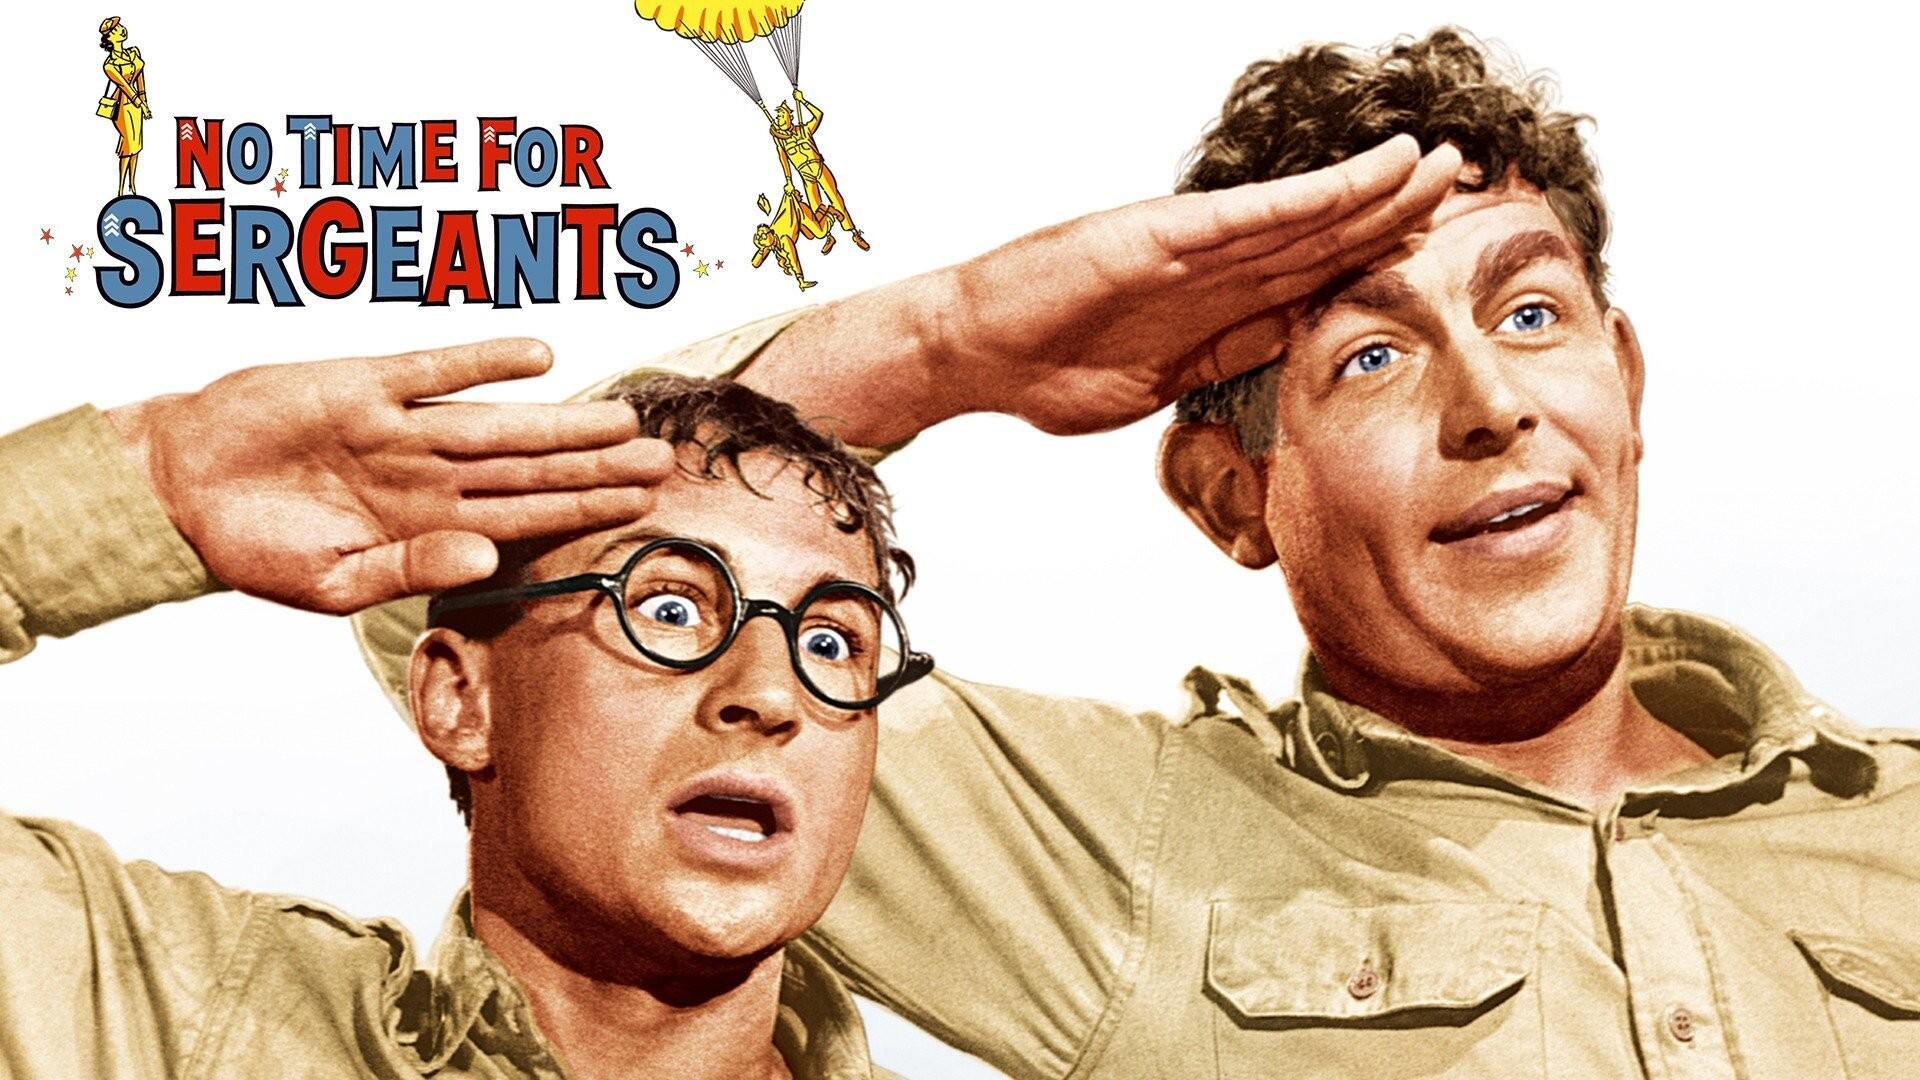 41-facts-about-the-movie-no-time-for-sergeants